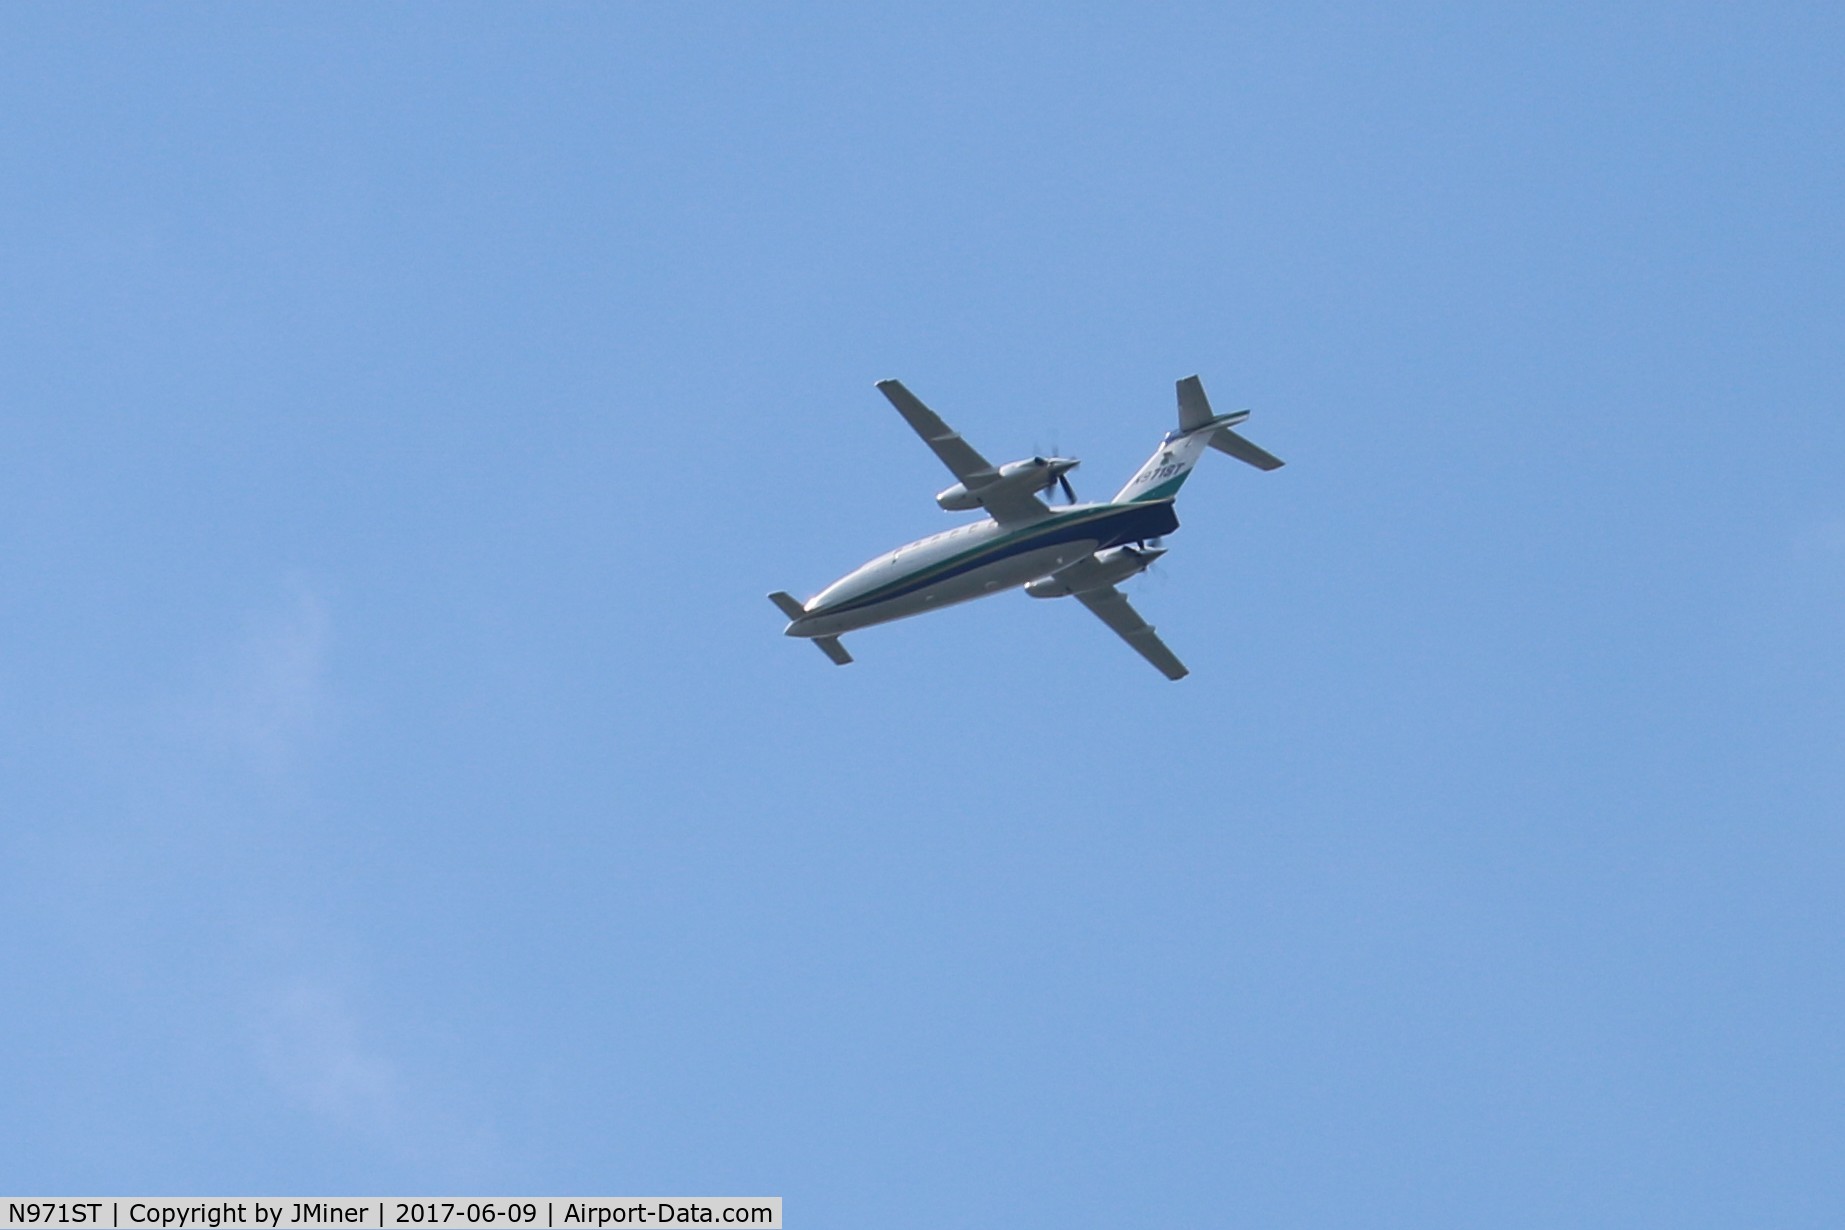 N971ST, Piaggio P-180 C/N 1219, Flying over W Dundee, IL.